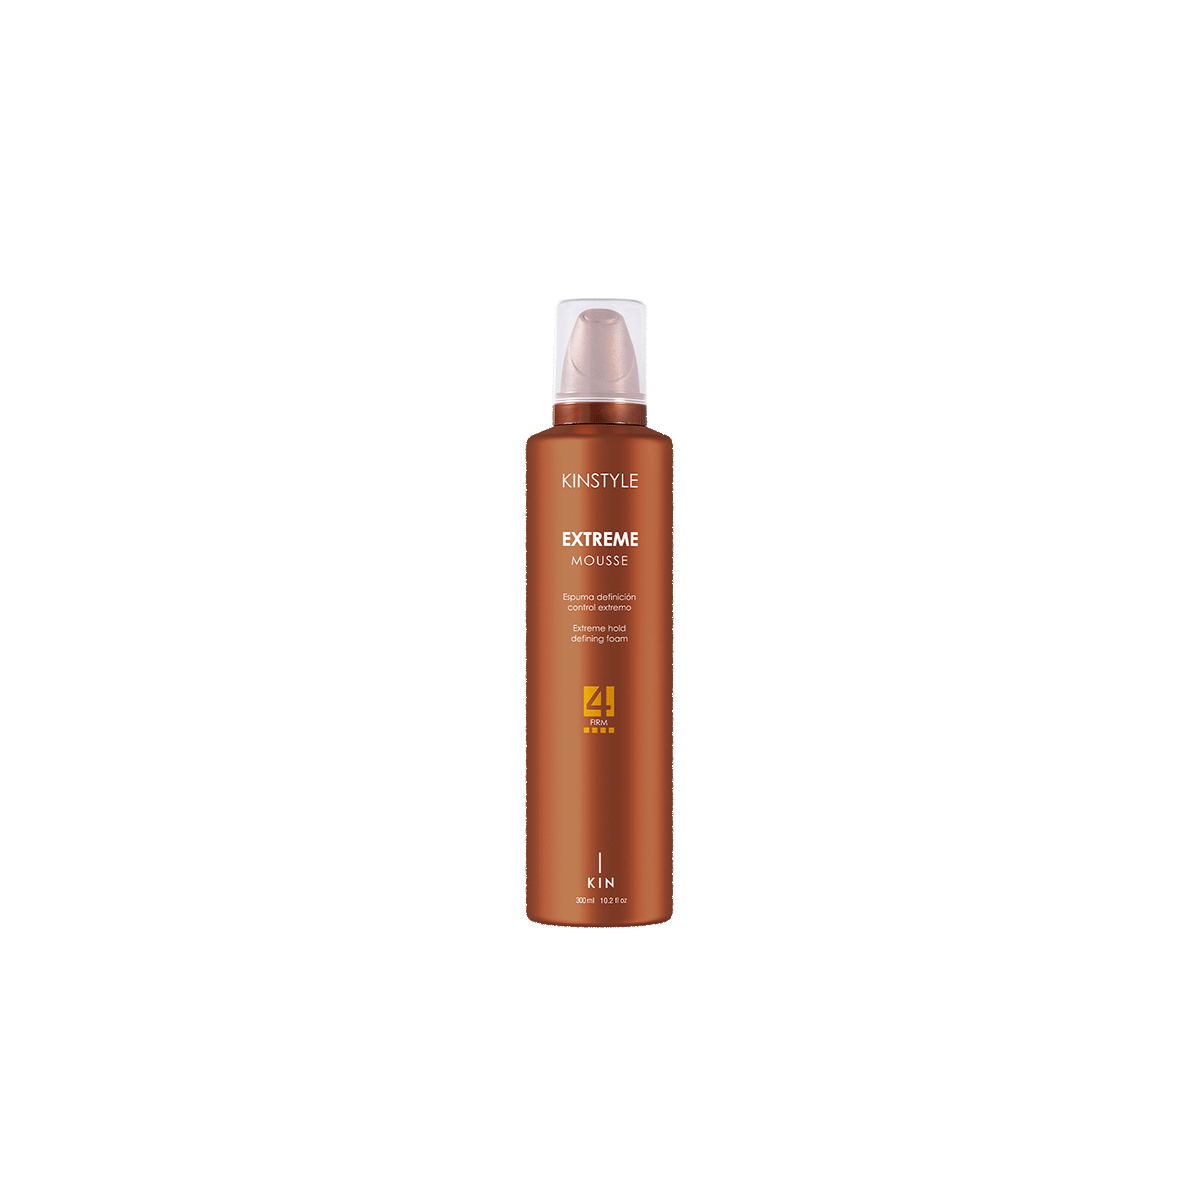 Kinstyle Extreme Mousse